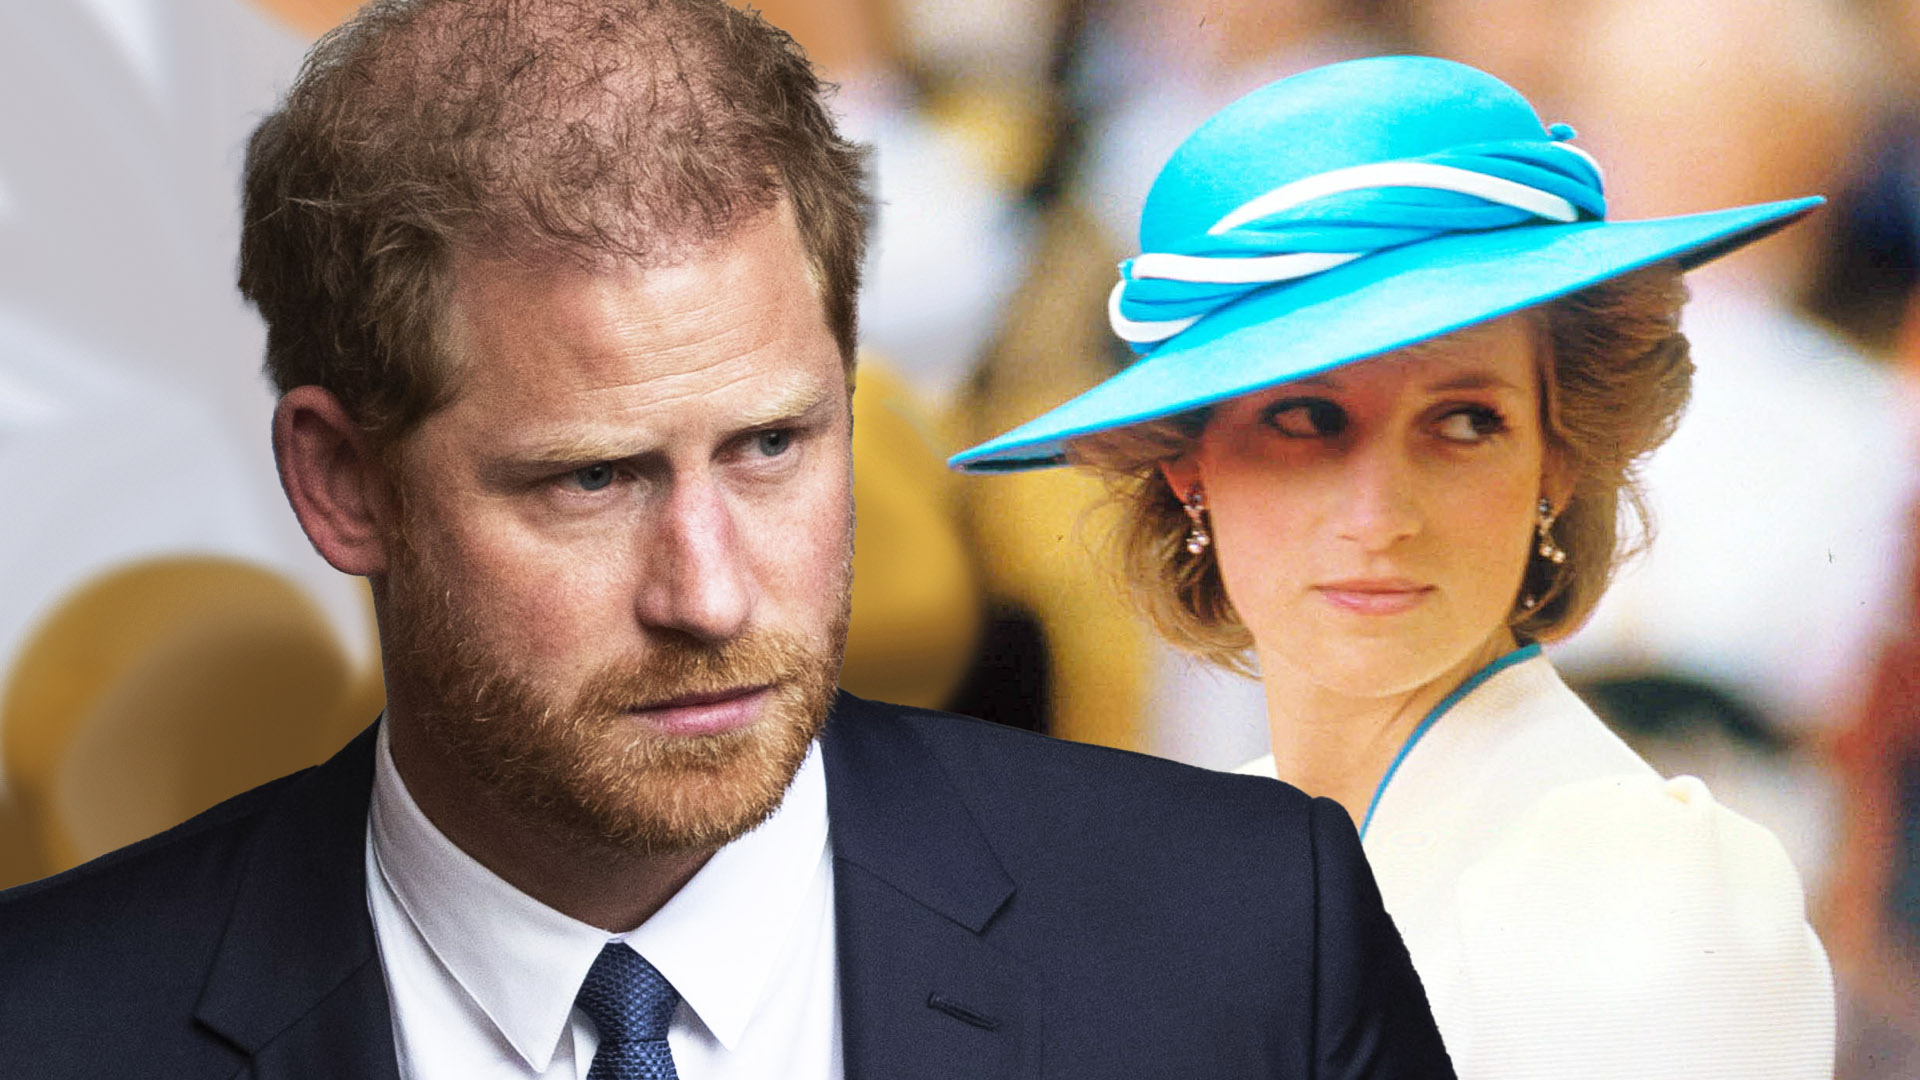 Heartbreaking Diana Conspiracy Theory Prince Harry Believed In for Far Too Long